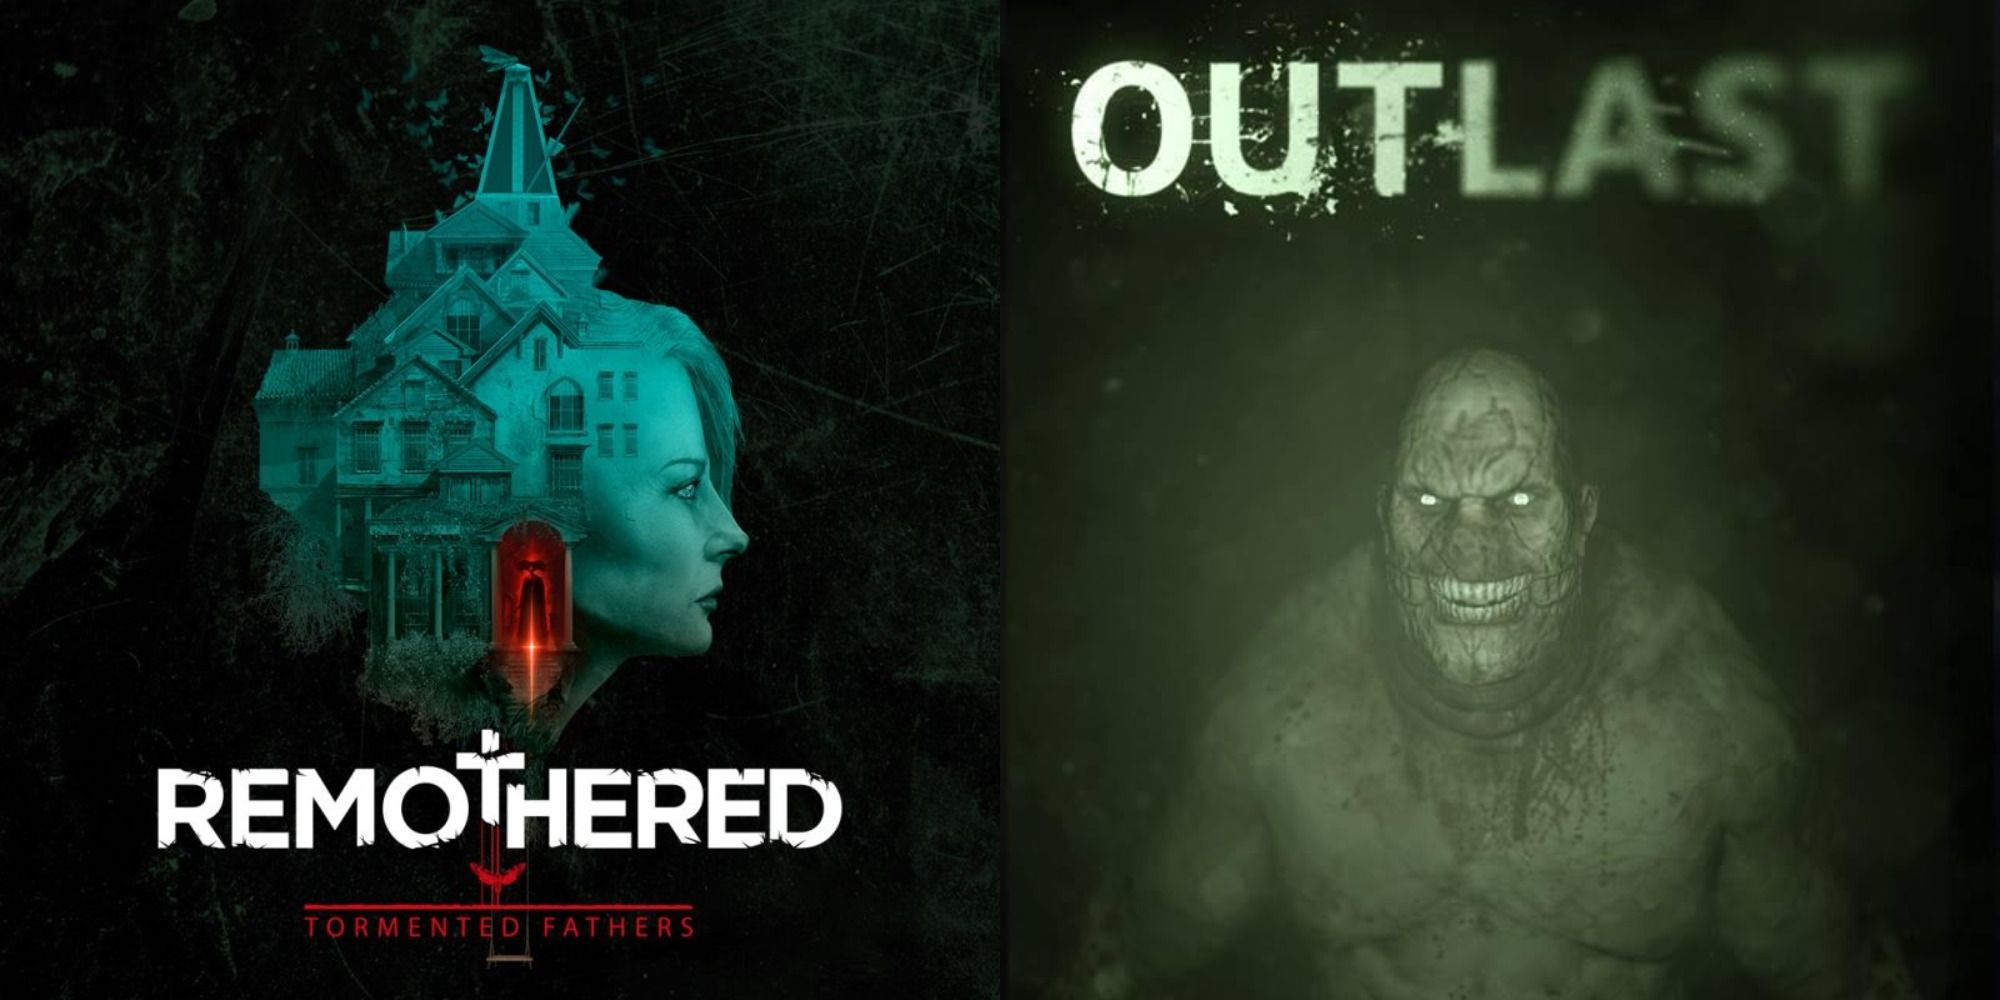 Split image showing covers for Remothered: Tormented Feathers and Outlast.